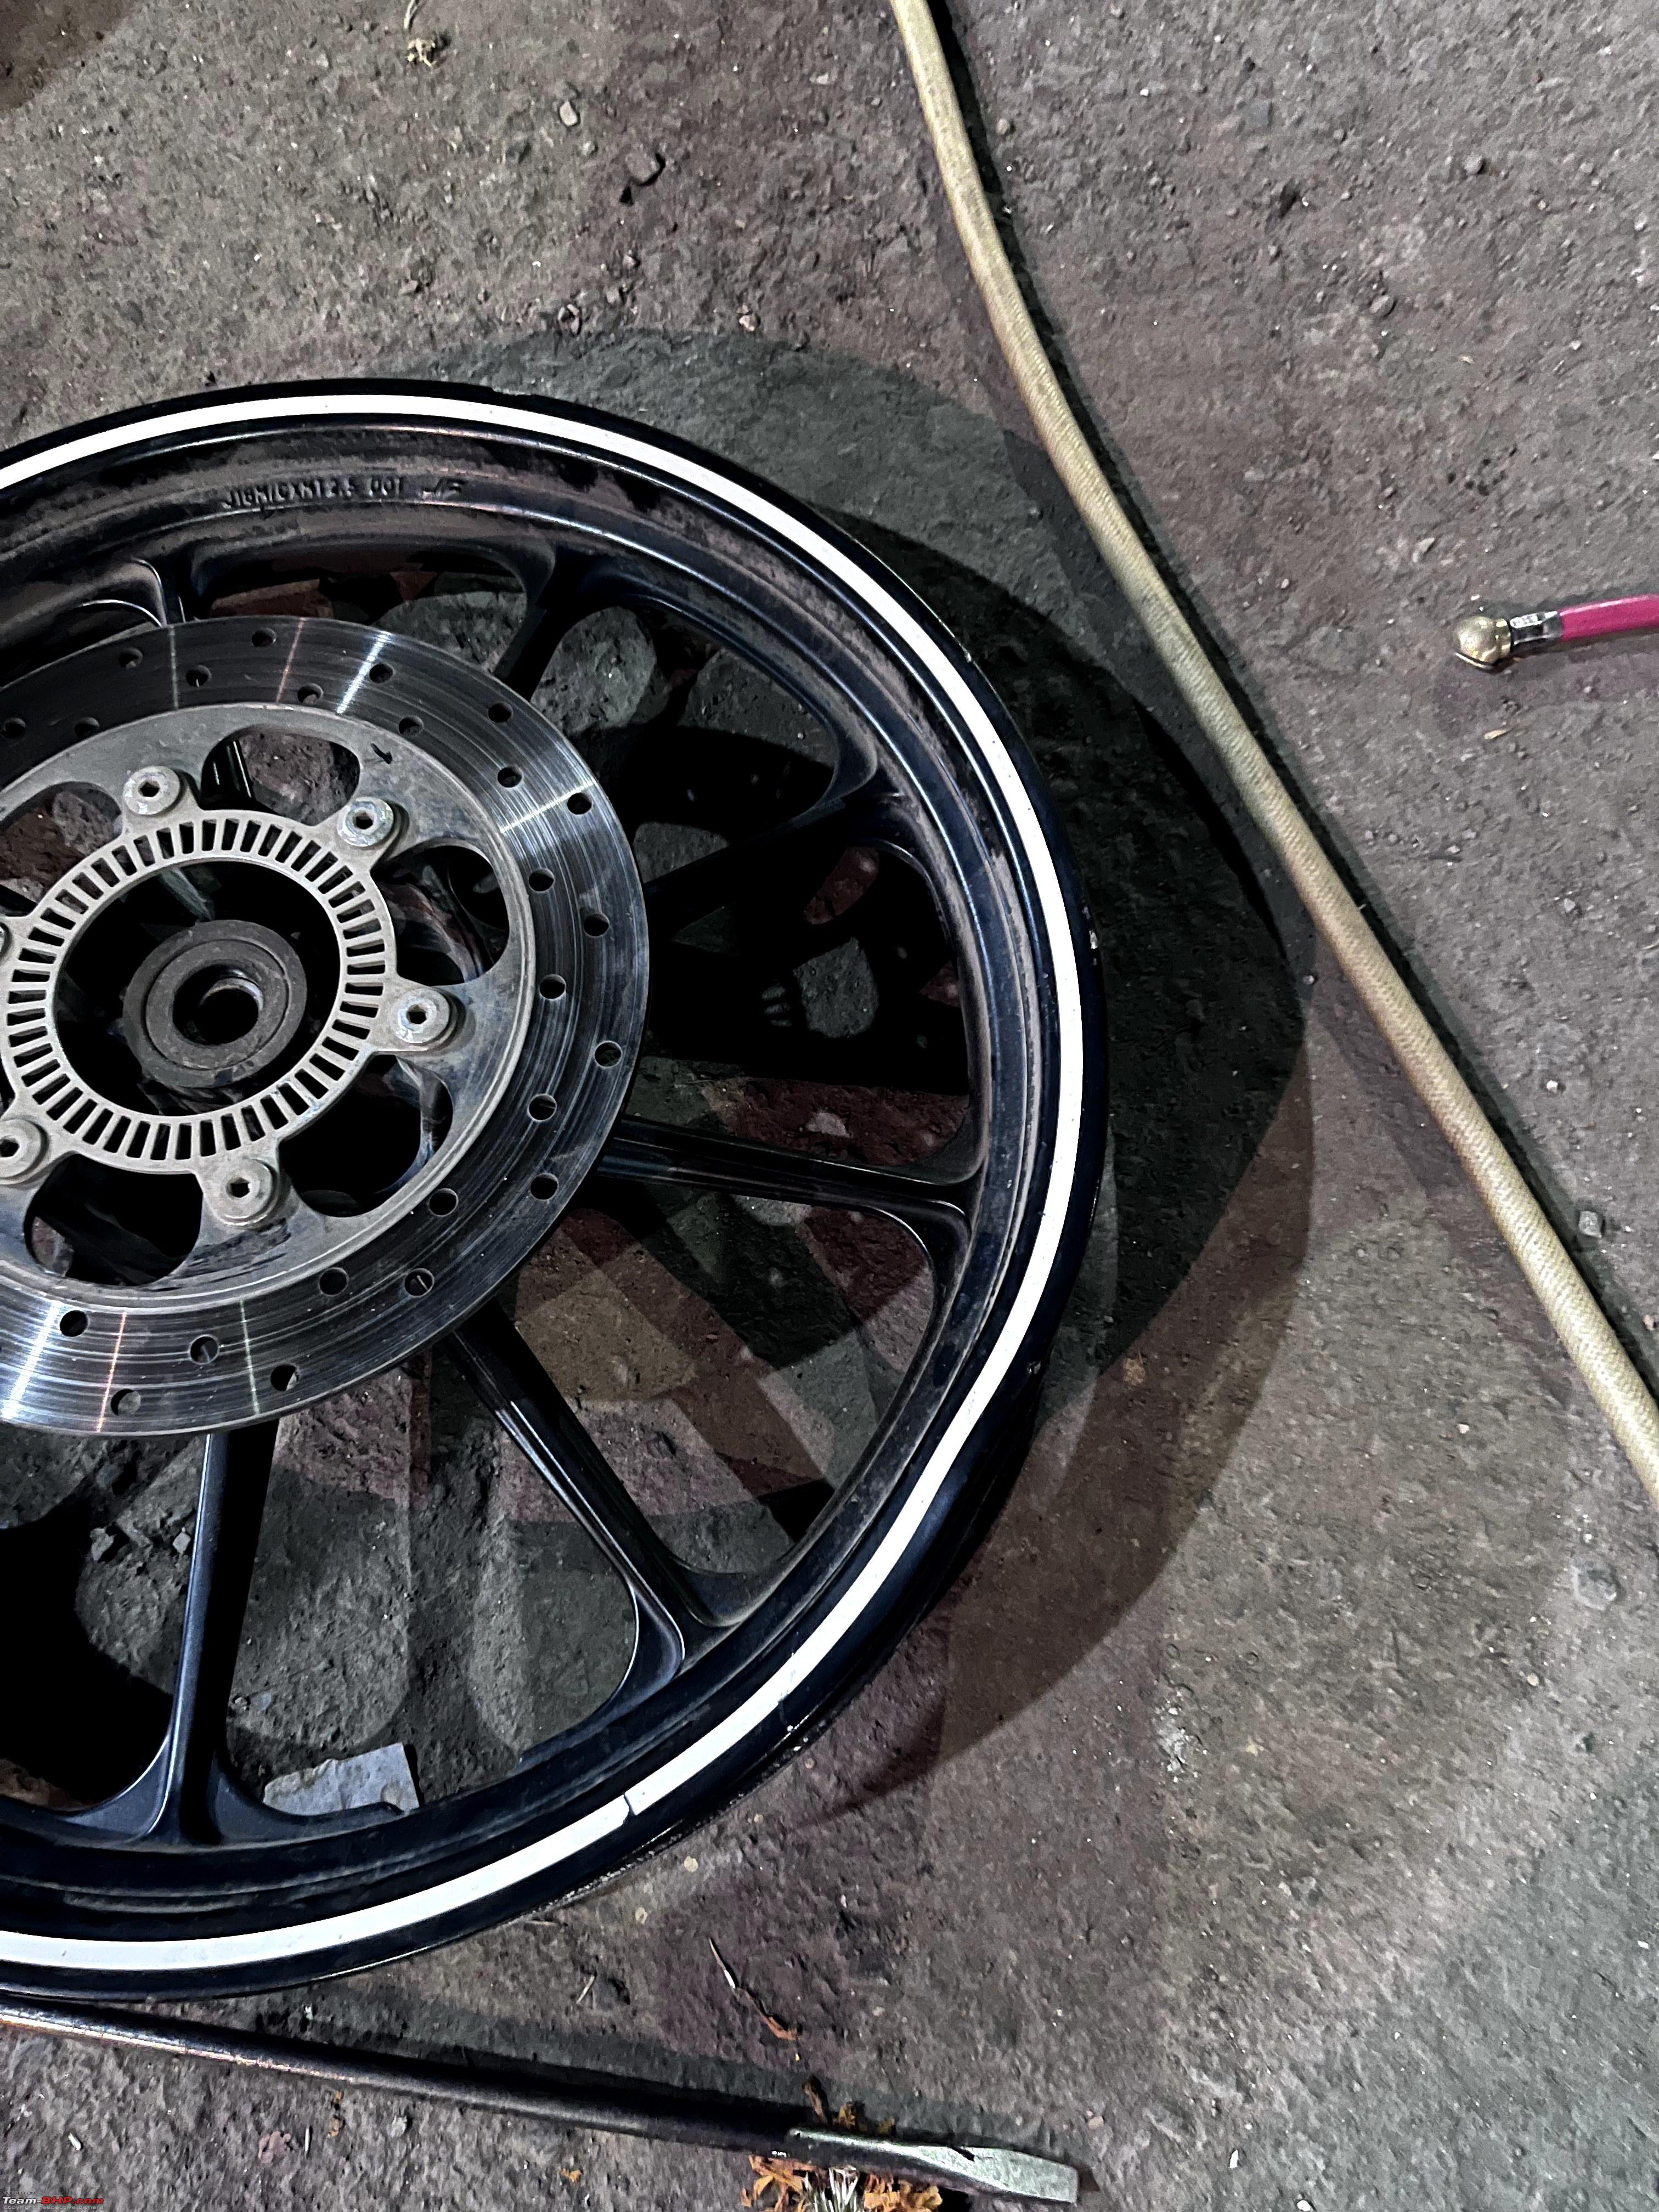 Motorcycle wheel bent after hitting pothole | Now what? - Team-BHP